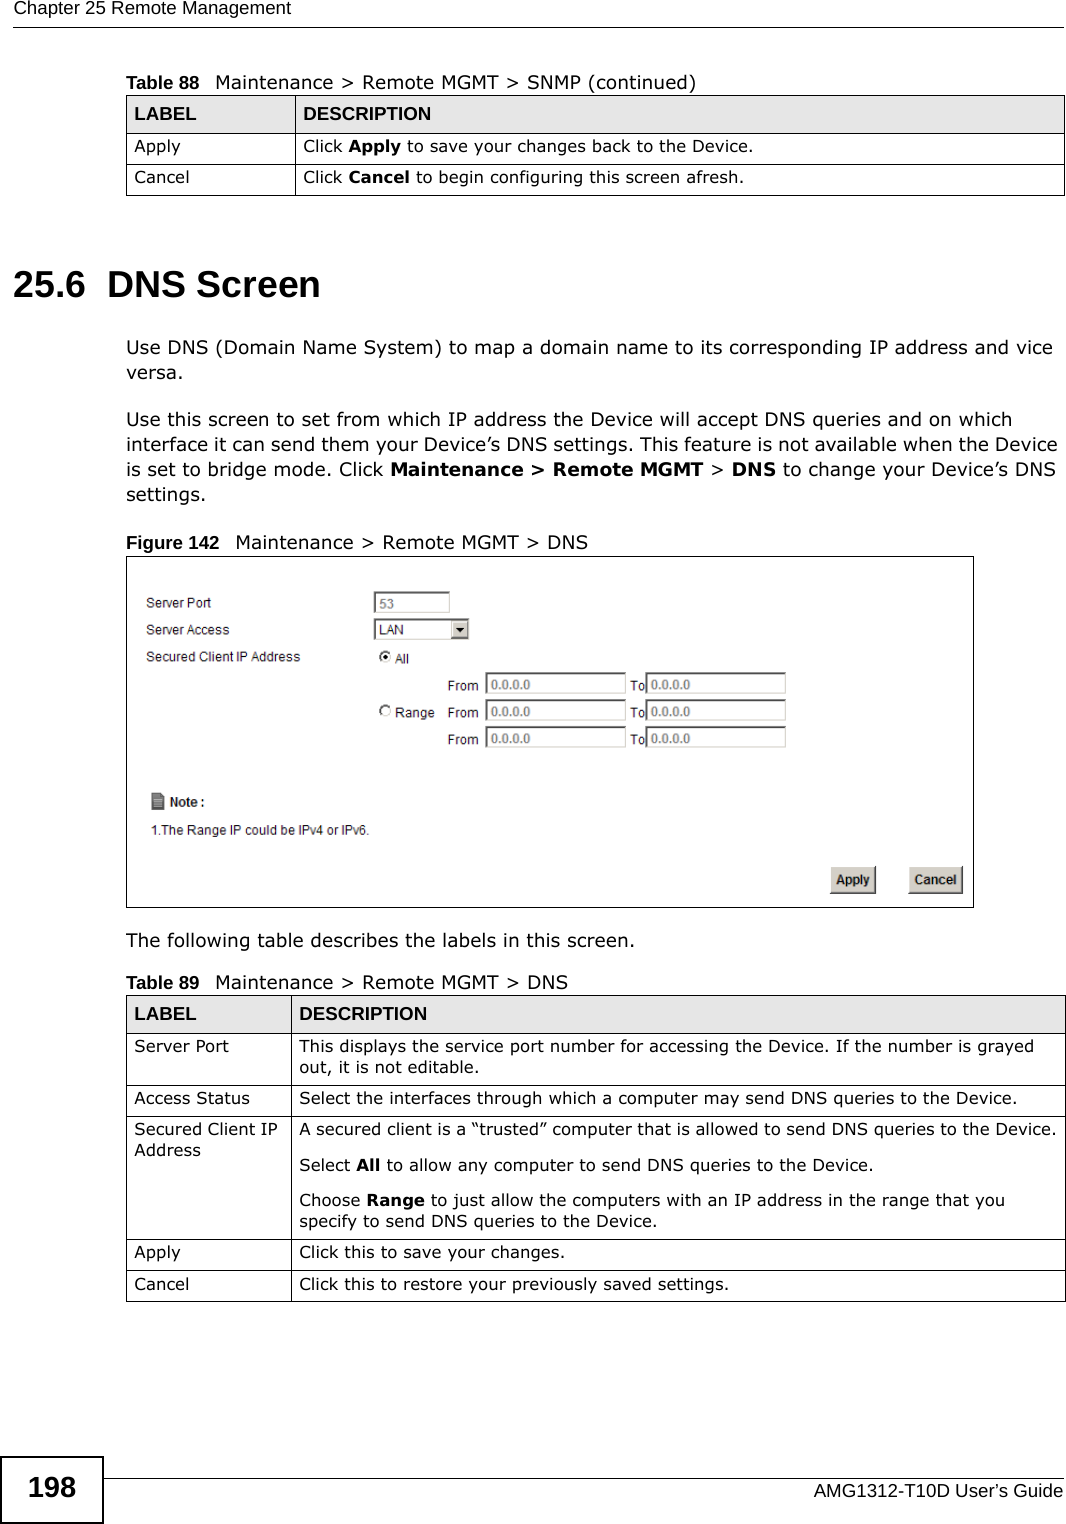 Chapter 25 Remote ManagementAMG1312-T10D User’s Guide19825.6  DNS Screen Use DNS (Domain Name System) to map a domain name to its corresponding IP address and vice versa.Use this screen to set from which IP address the Device will accept DNS queries and on which interface it can send them your Device’s DNS settings. This feature is not available when the Device is set to bridge mode. Click Maintenance &gt; Remote MGMT &gt; DNS to change your Device’s DNS settings.Figure 142   Maintenance &gt; Remote MGMT &gt; DNSThe following table describes the labels in this screen.Apply Click Apply to save your changes back to the Device. Cancel Click Cancel to begin configuring this screen afresh.Table 88   Maintenance &gt; Remote MGMT &gt; SNMP (continued)LABEL DESCRIPTIONTable 89   Maintenance &gt; Remote MGMT &gt; DNSLABEL DESCRIPTIONServer Port This displays the service port number for accessing the Device. If the number is grayed out, it is not editable.Access Status Select the interfaces through which a computer may send DNS queries to the Device.Secured Client IP AddressA secured client is a “trusted” computer that is allowed to send DNS queries to the Device.Select All to allow any computer to send DNS queries to the Device.Choose Range to just allow the computers with an IP address in the range that you specify to send DNS queries to the Device.Apply Click this to save your changes.Cancel Click this to restore your previously saved settings.